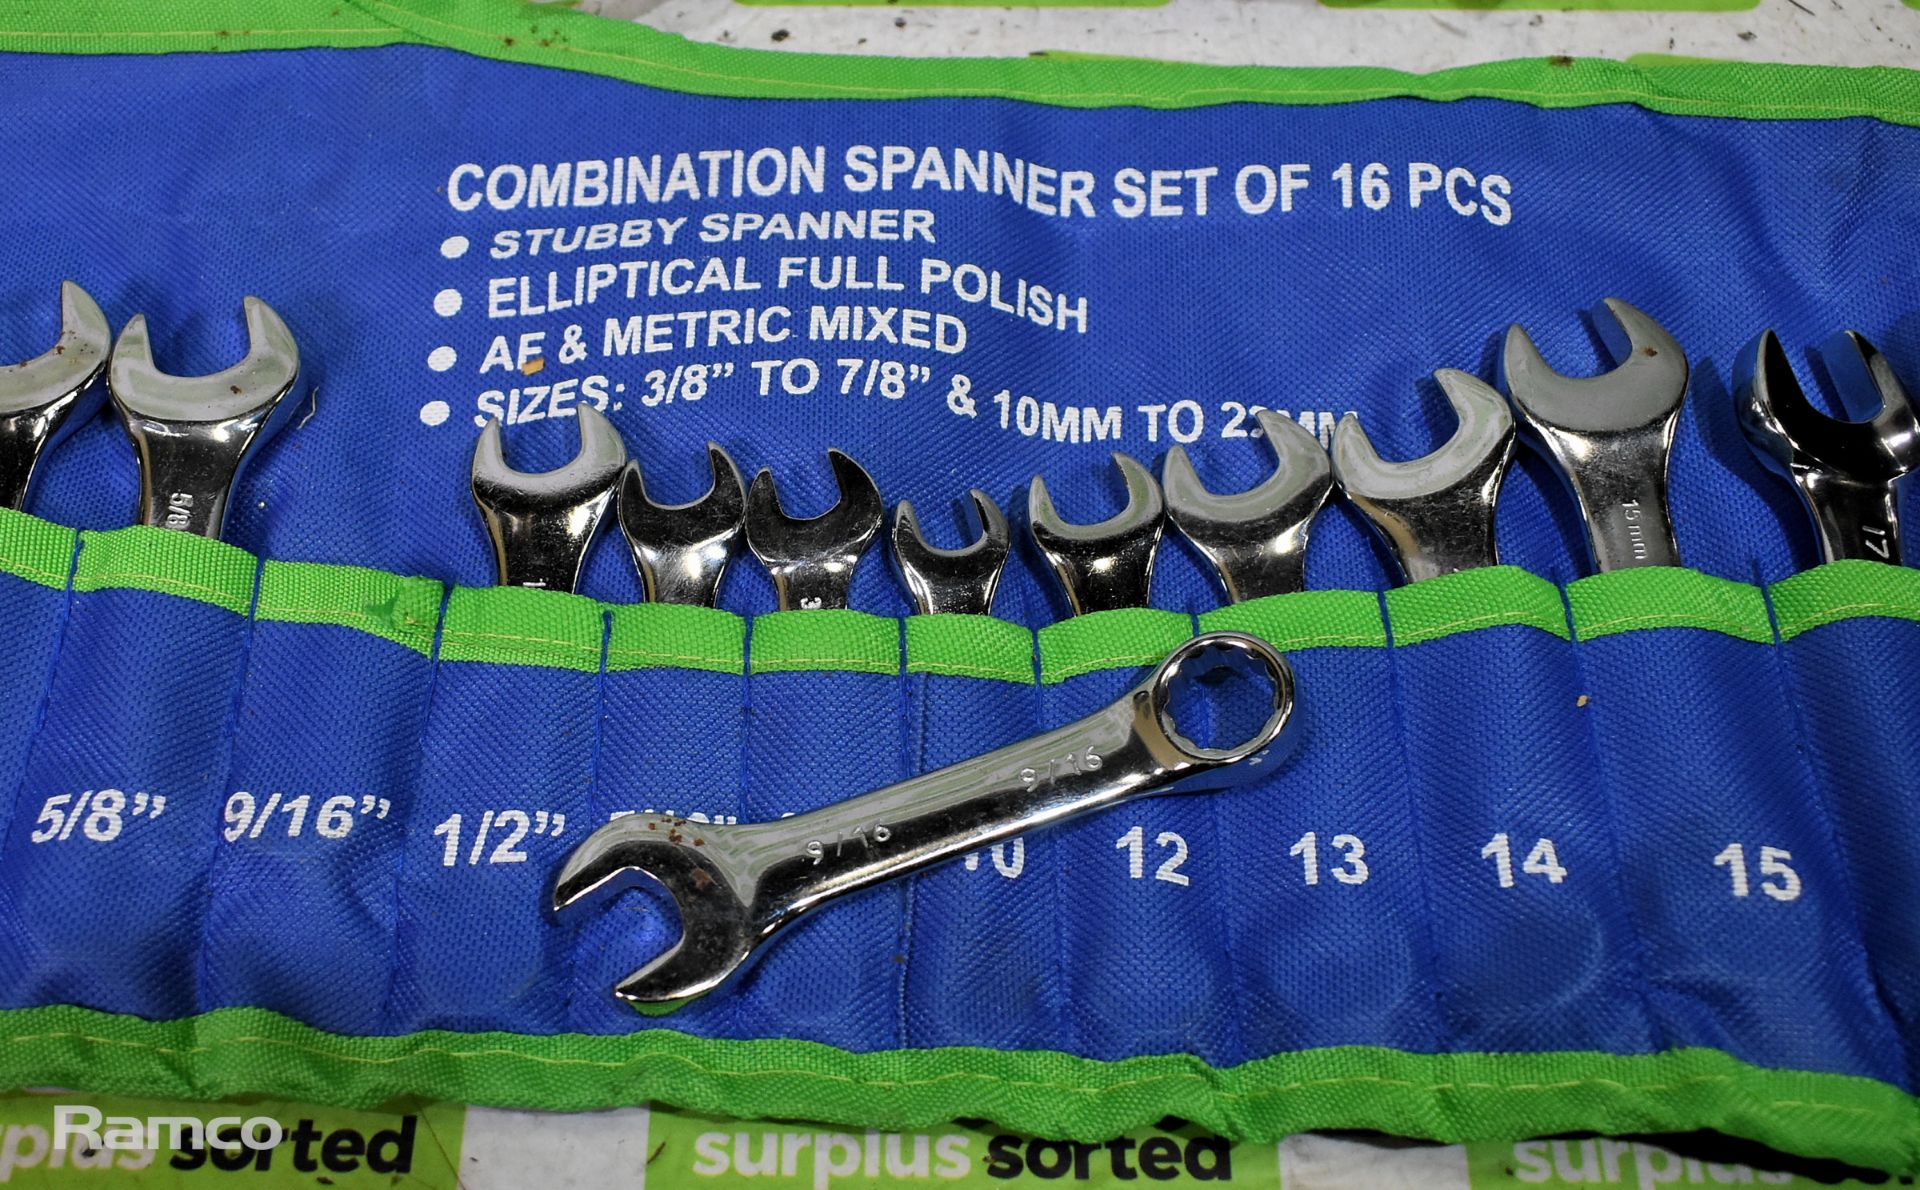 2x 16 piece stubby spanner sets, 6x twin pack 4.5m ratchet tie downs, 4x Green Jem ratchet straps - Image 3 of 9